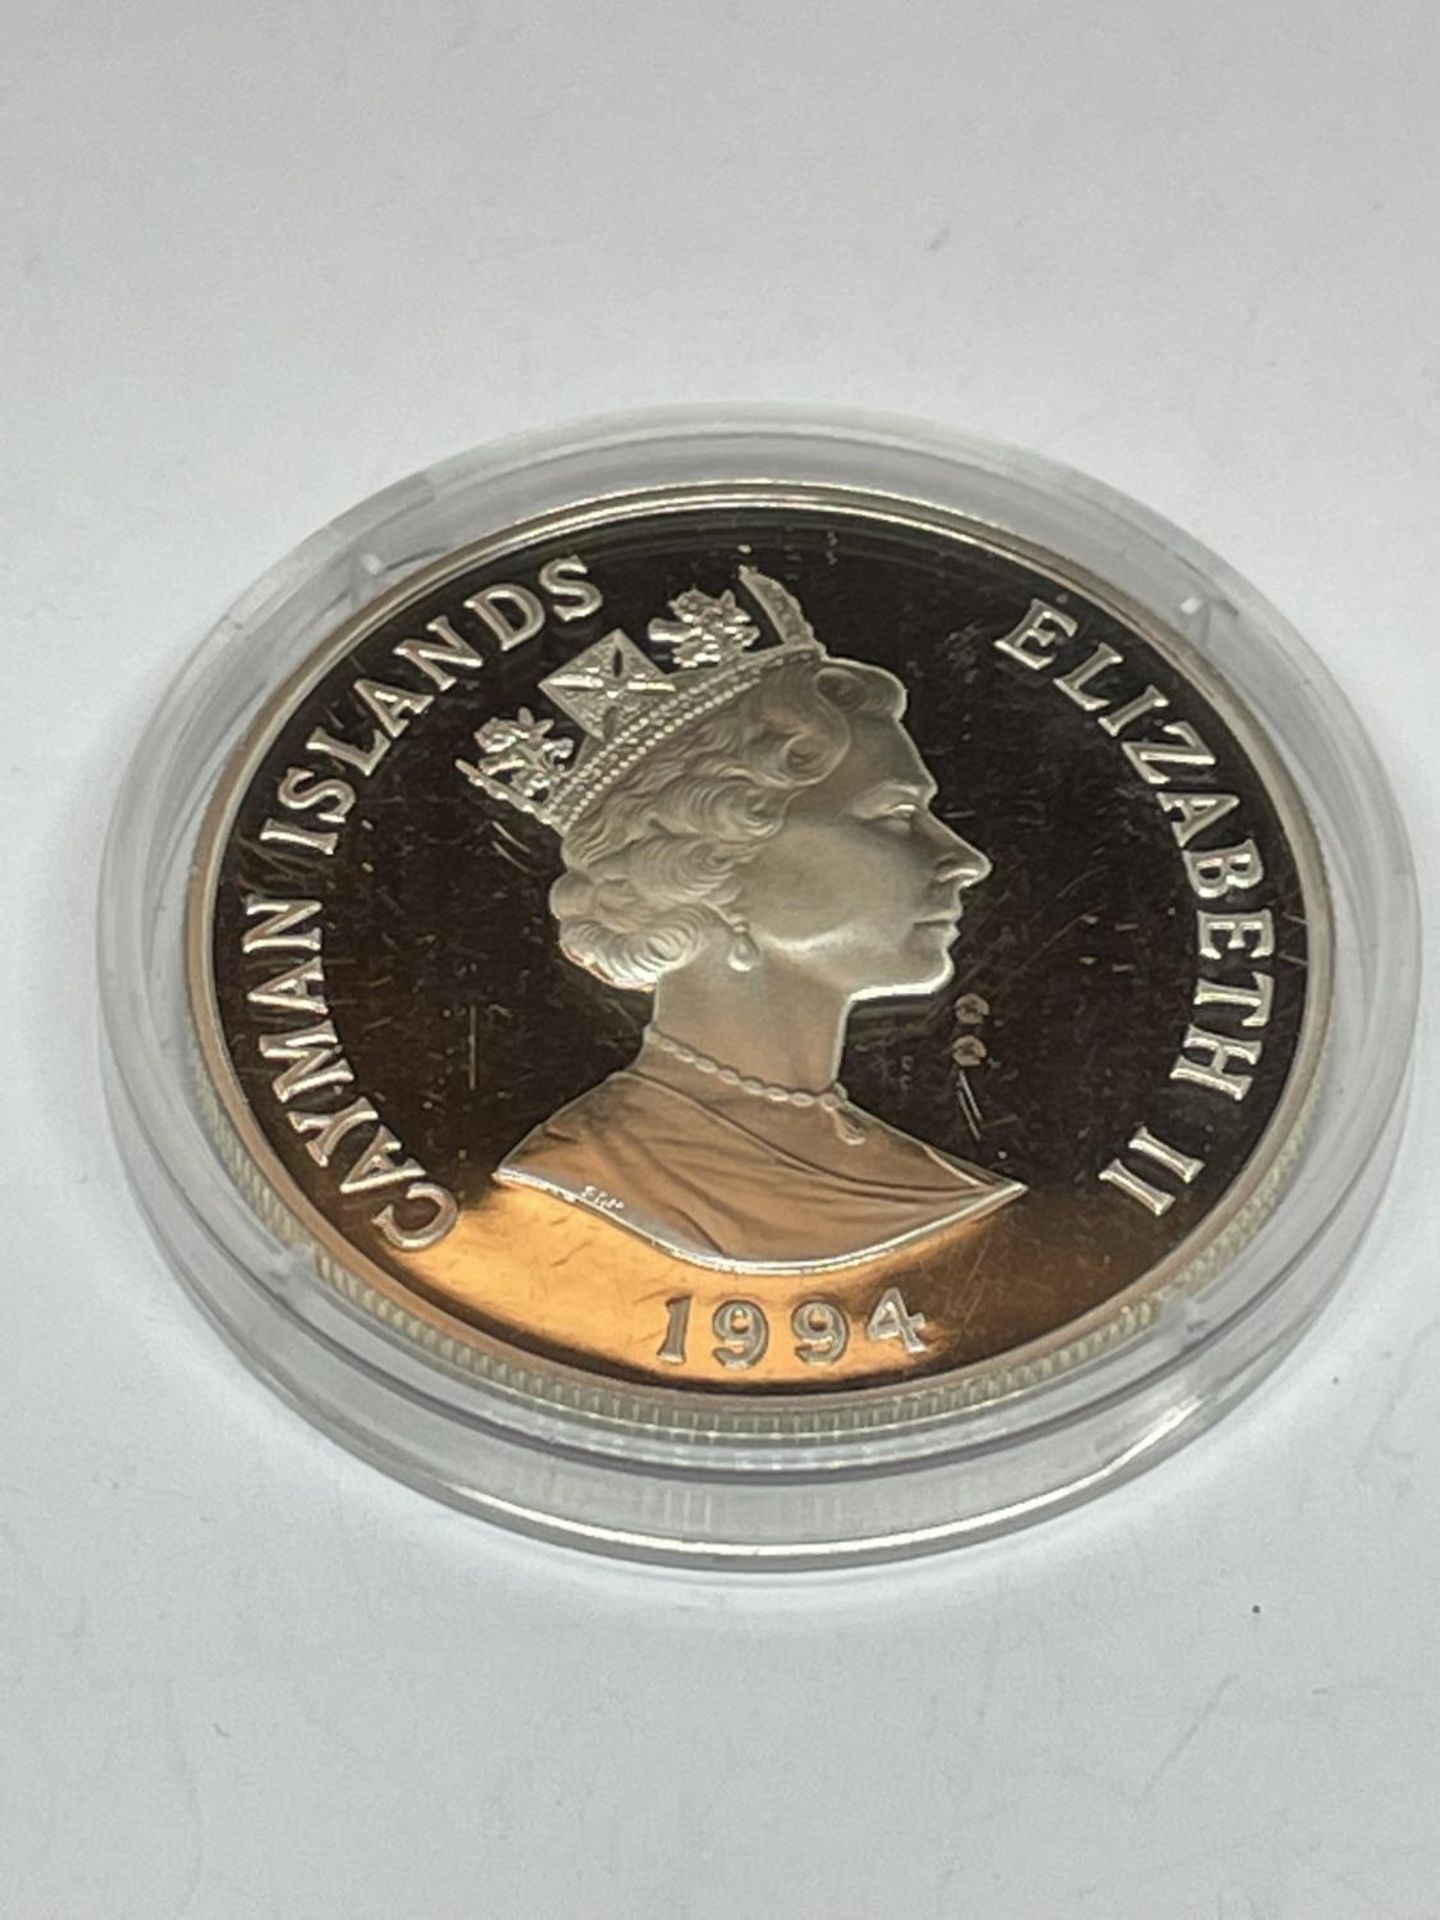 A SILVER PROOF ONE DOLLAR COIN IN A CAPSULE - Image 2 of 2